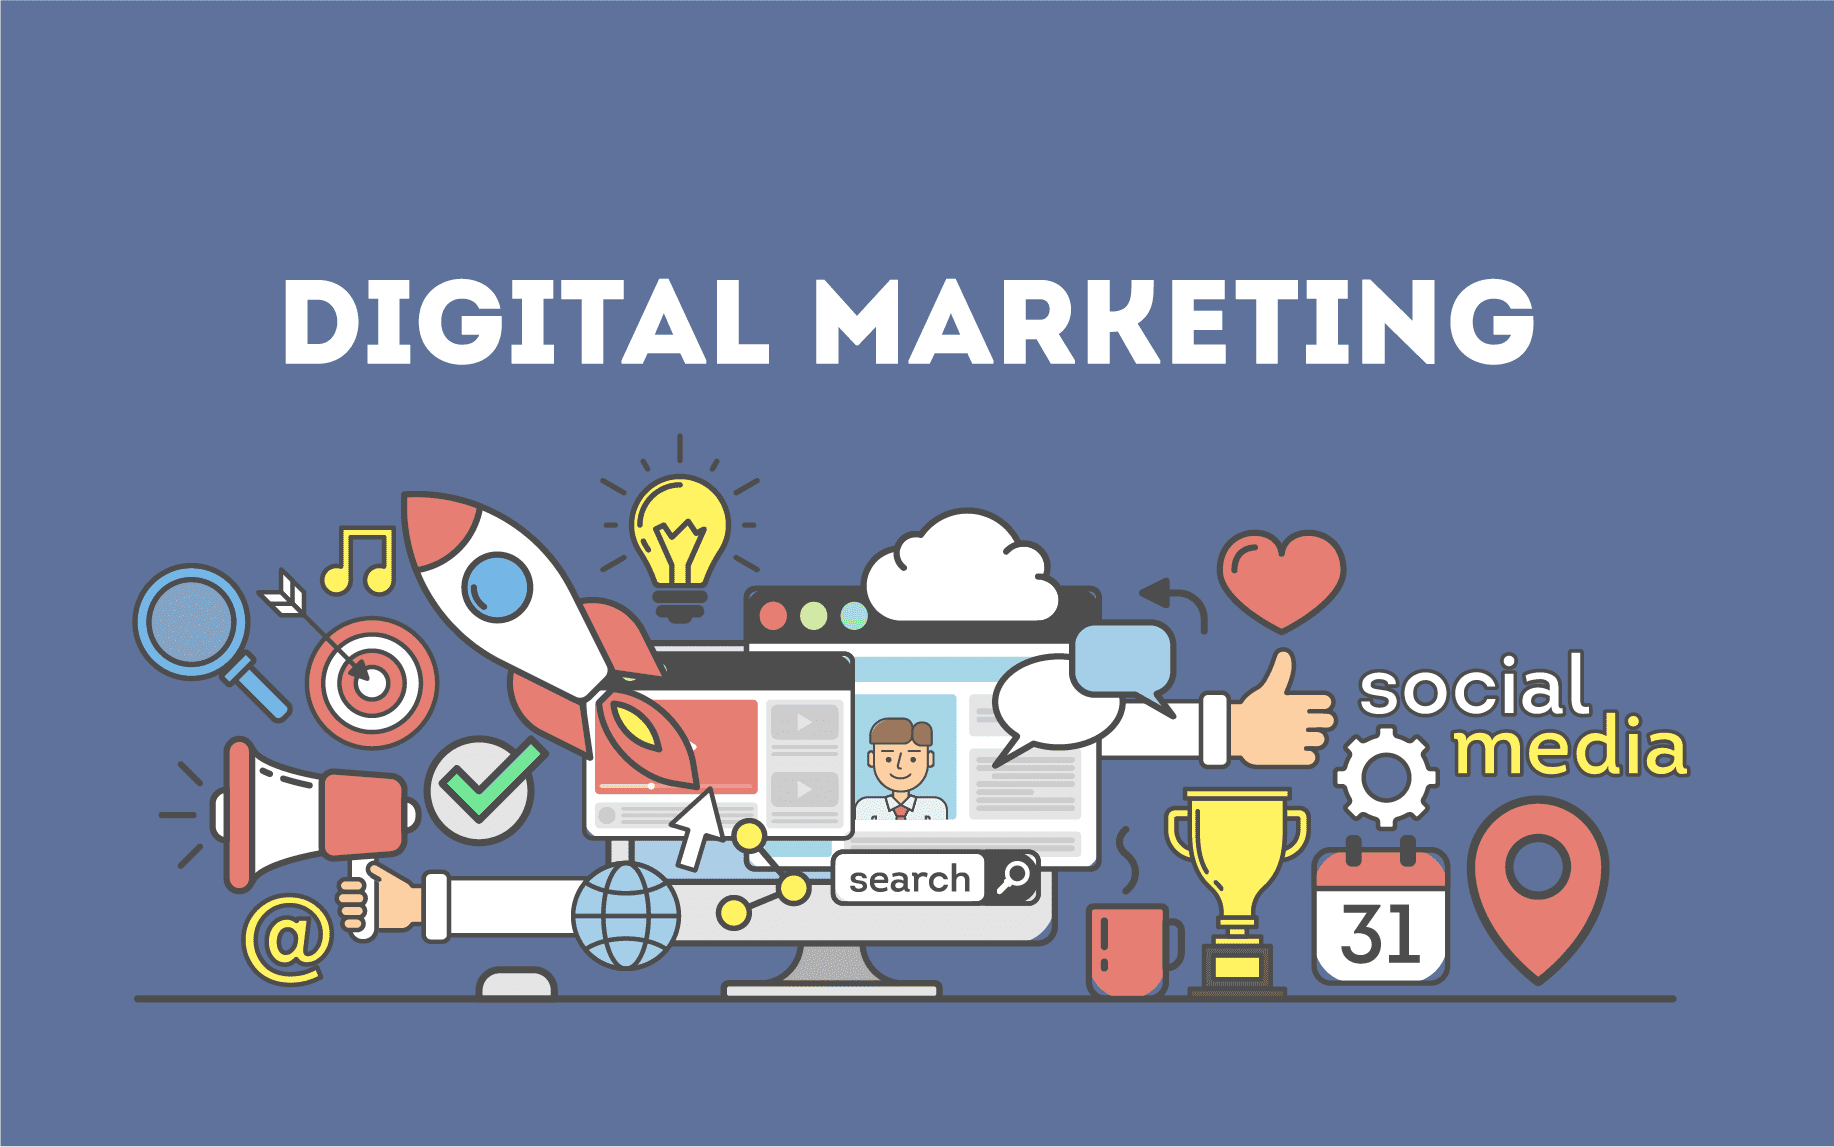 Know what are the benefits you earn by asking for help in Digital Marketing in South Korea